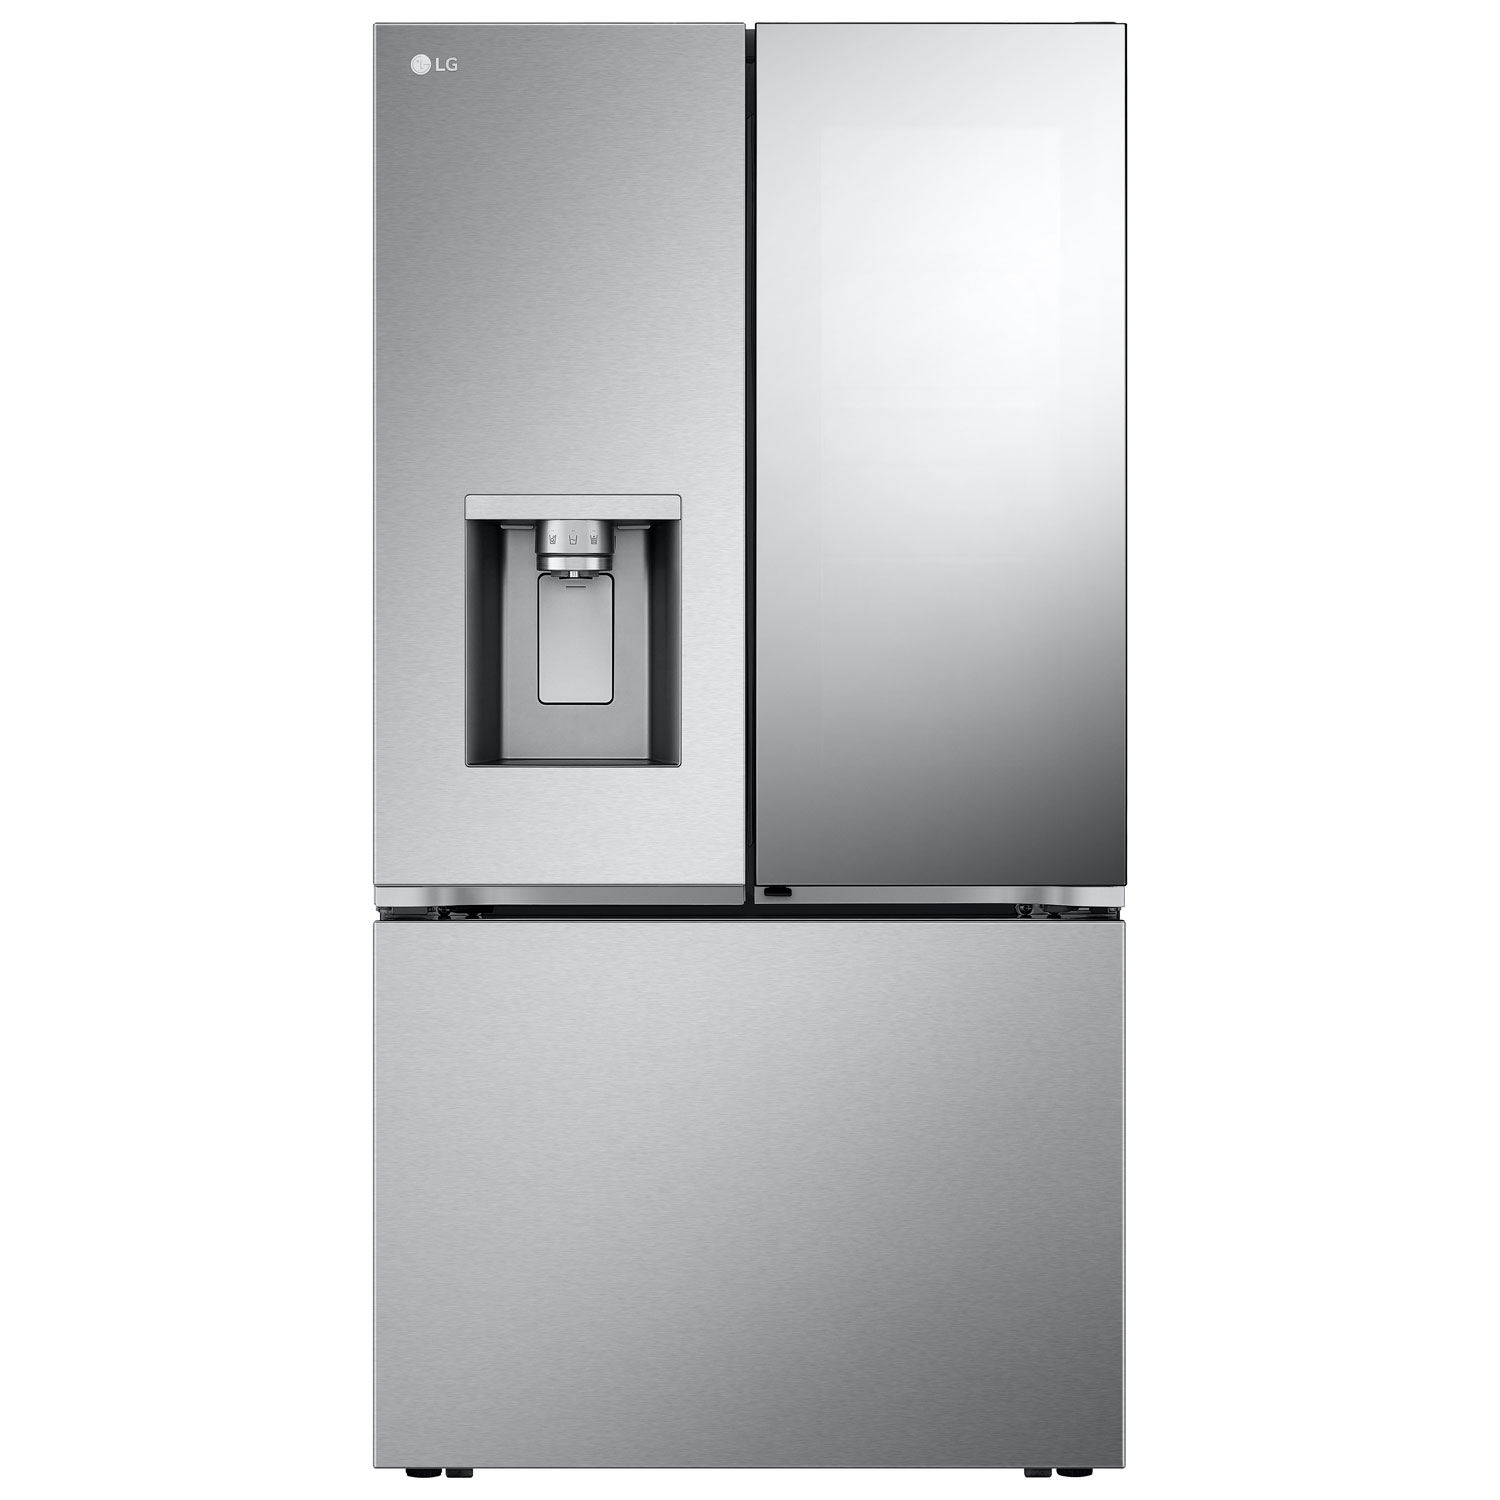 LG 36" 26 cu. ft. Smart Mirror InstaView Counter-Depth MAX French Door Refrigerator w/ Ice Dispenser - Stainless